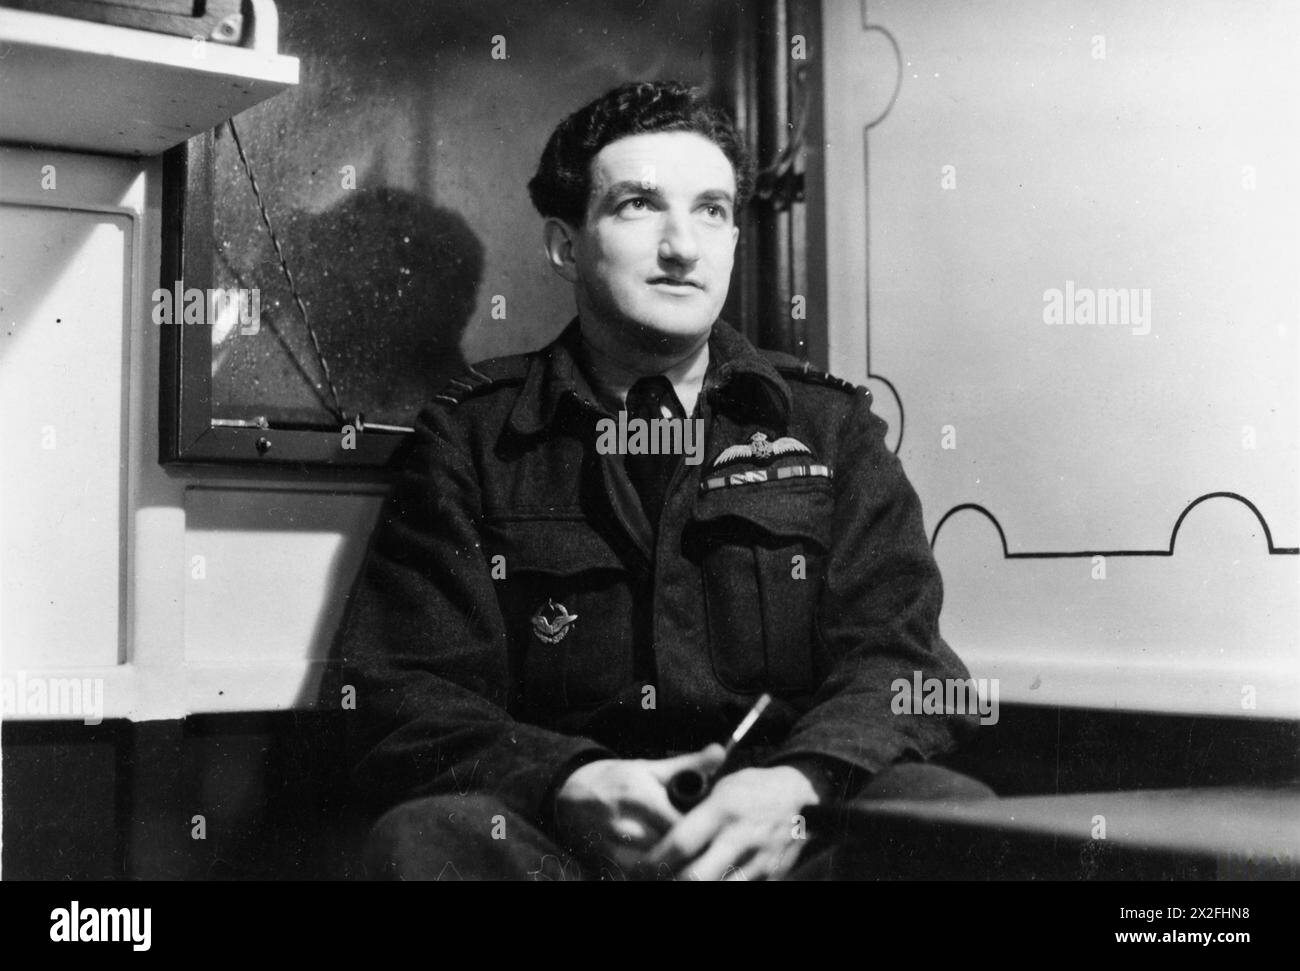 ROYAL AIR FORCE: 2ND TACTICAL AIR FORCE, 1943-1945. - Half-length portrait of Wing Commander W V Crawford-Compton, while Officer Commanding No. 145 (Free French) Wing RAF in North-Western Europe Royal Air Force, Group, 84, Royal Air Force, Maintenance Unit, 201 Stock Photo